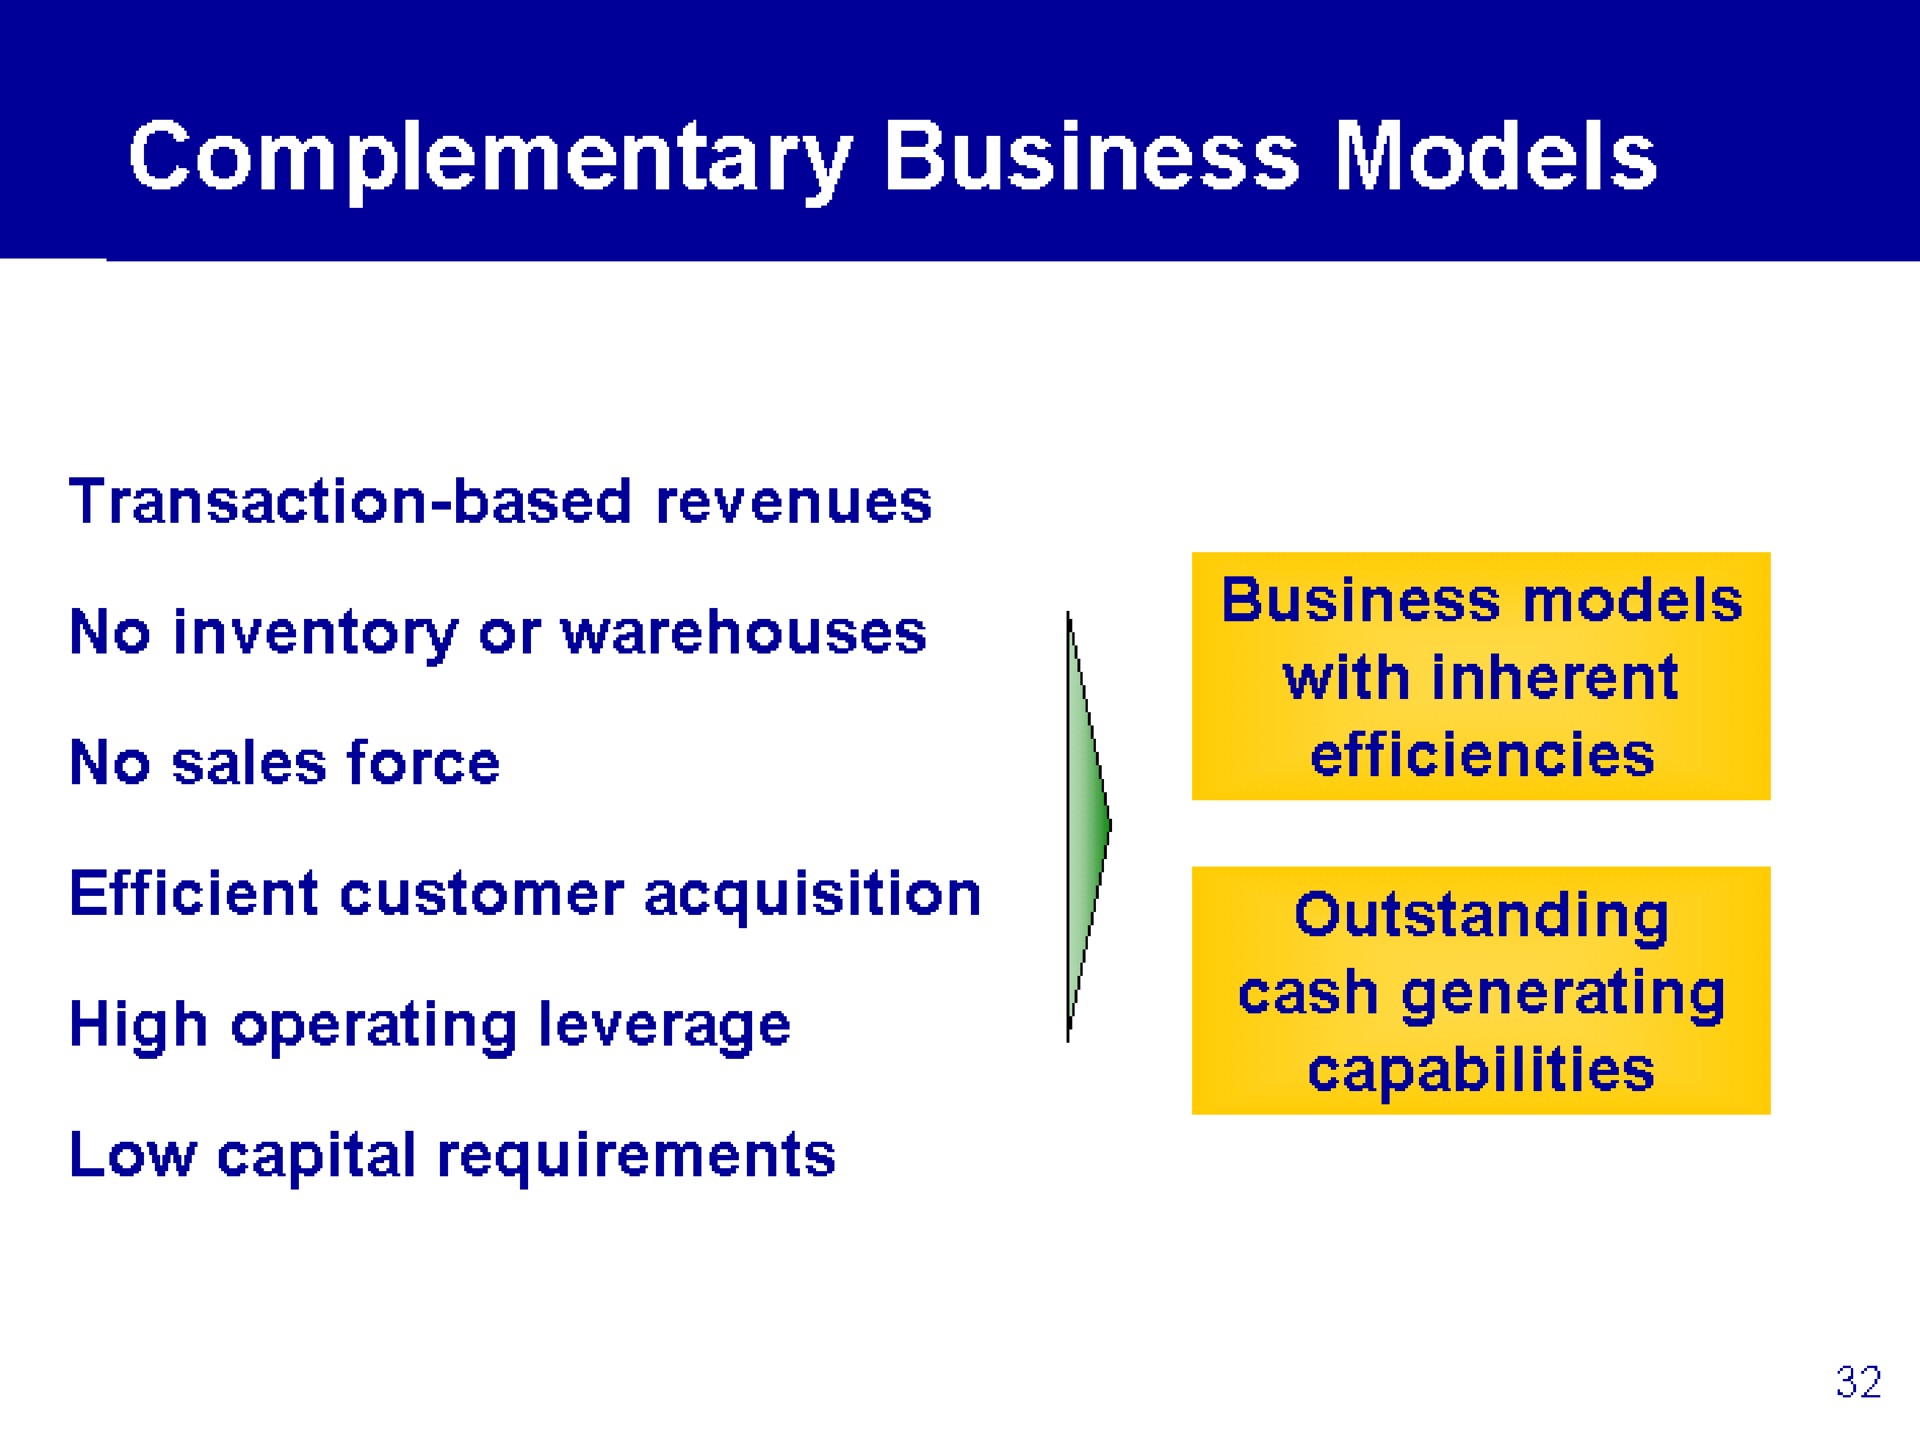 complementary business models | eBay